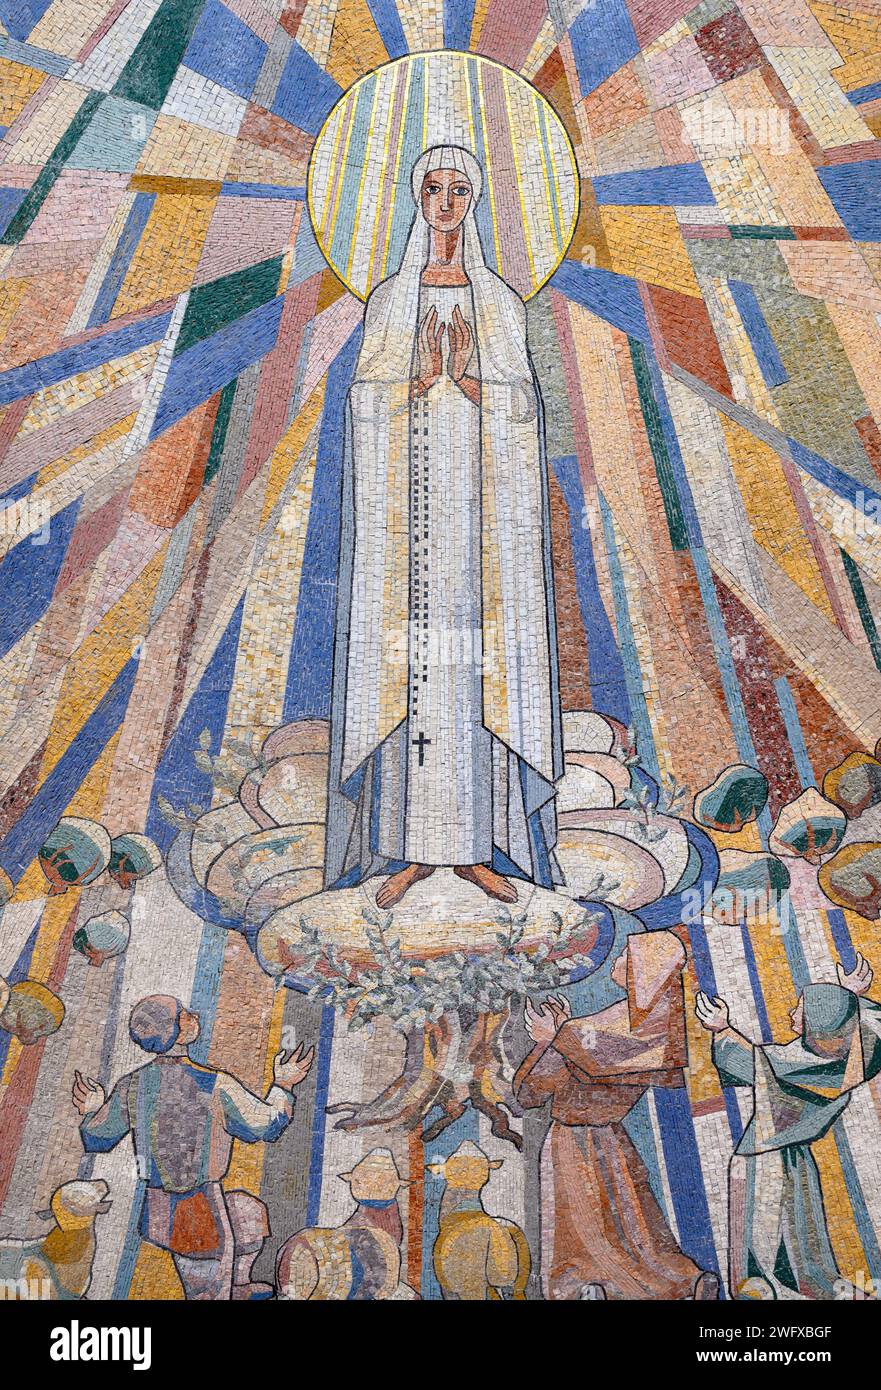 Our Lady of Fatima. A mosaic on the ceiling of St Stephen's Chapel in Fatima, Portugal. Stock Photo